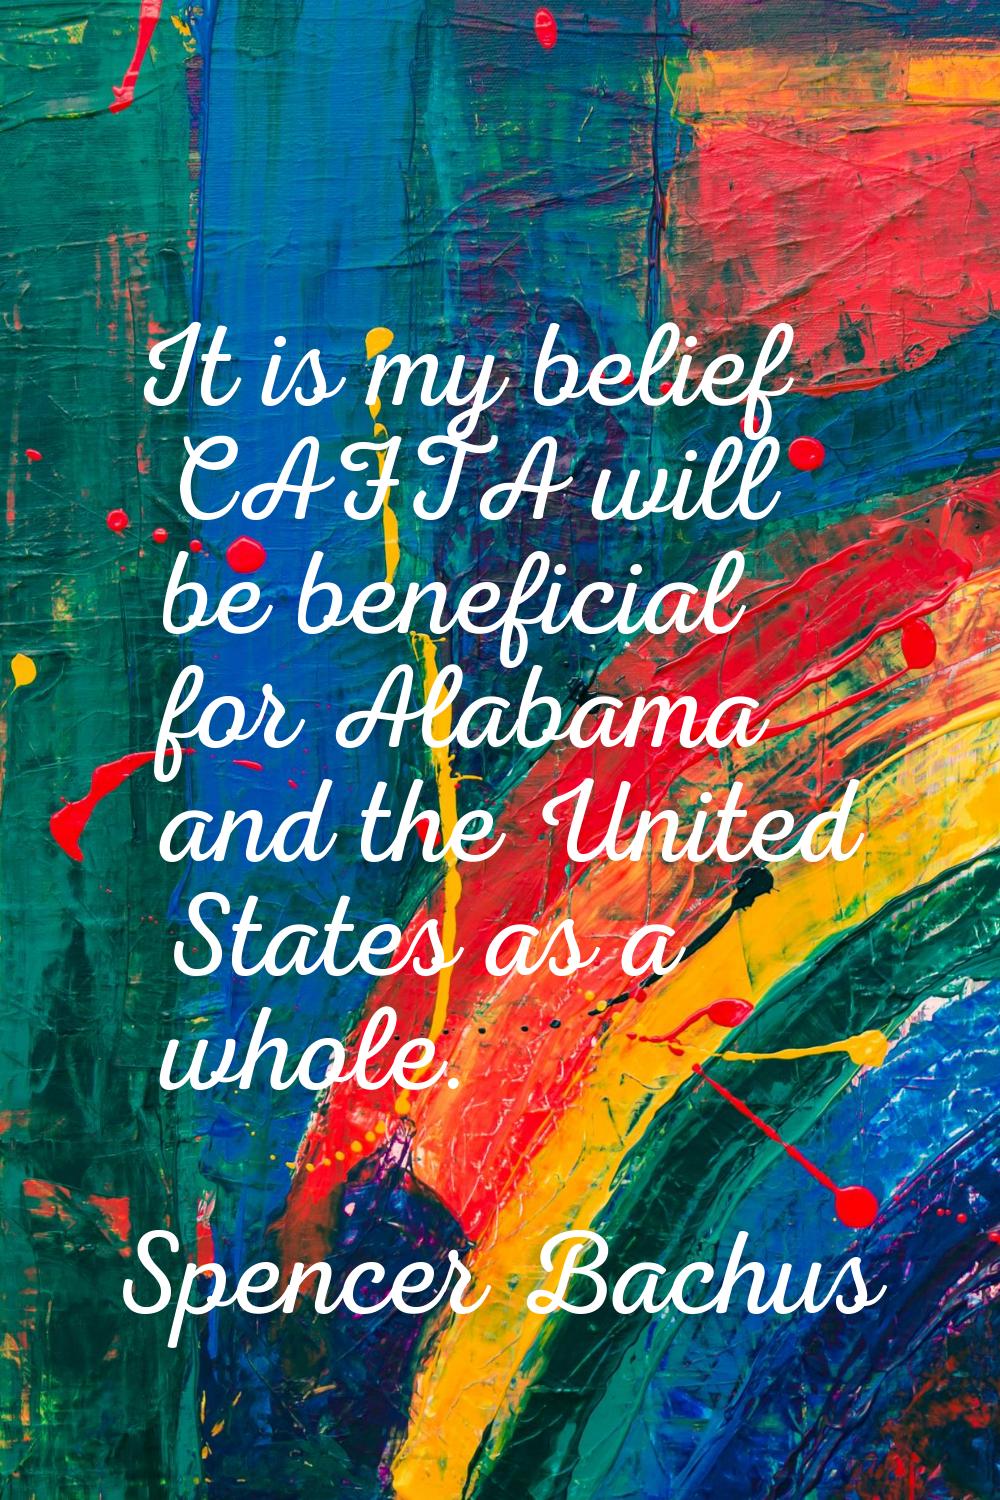 It is my belief CAFTA will be beneficial for Alabama and the United States as a whole.